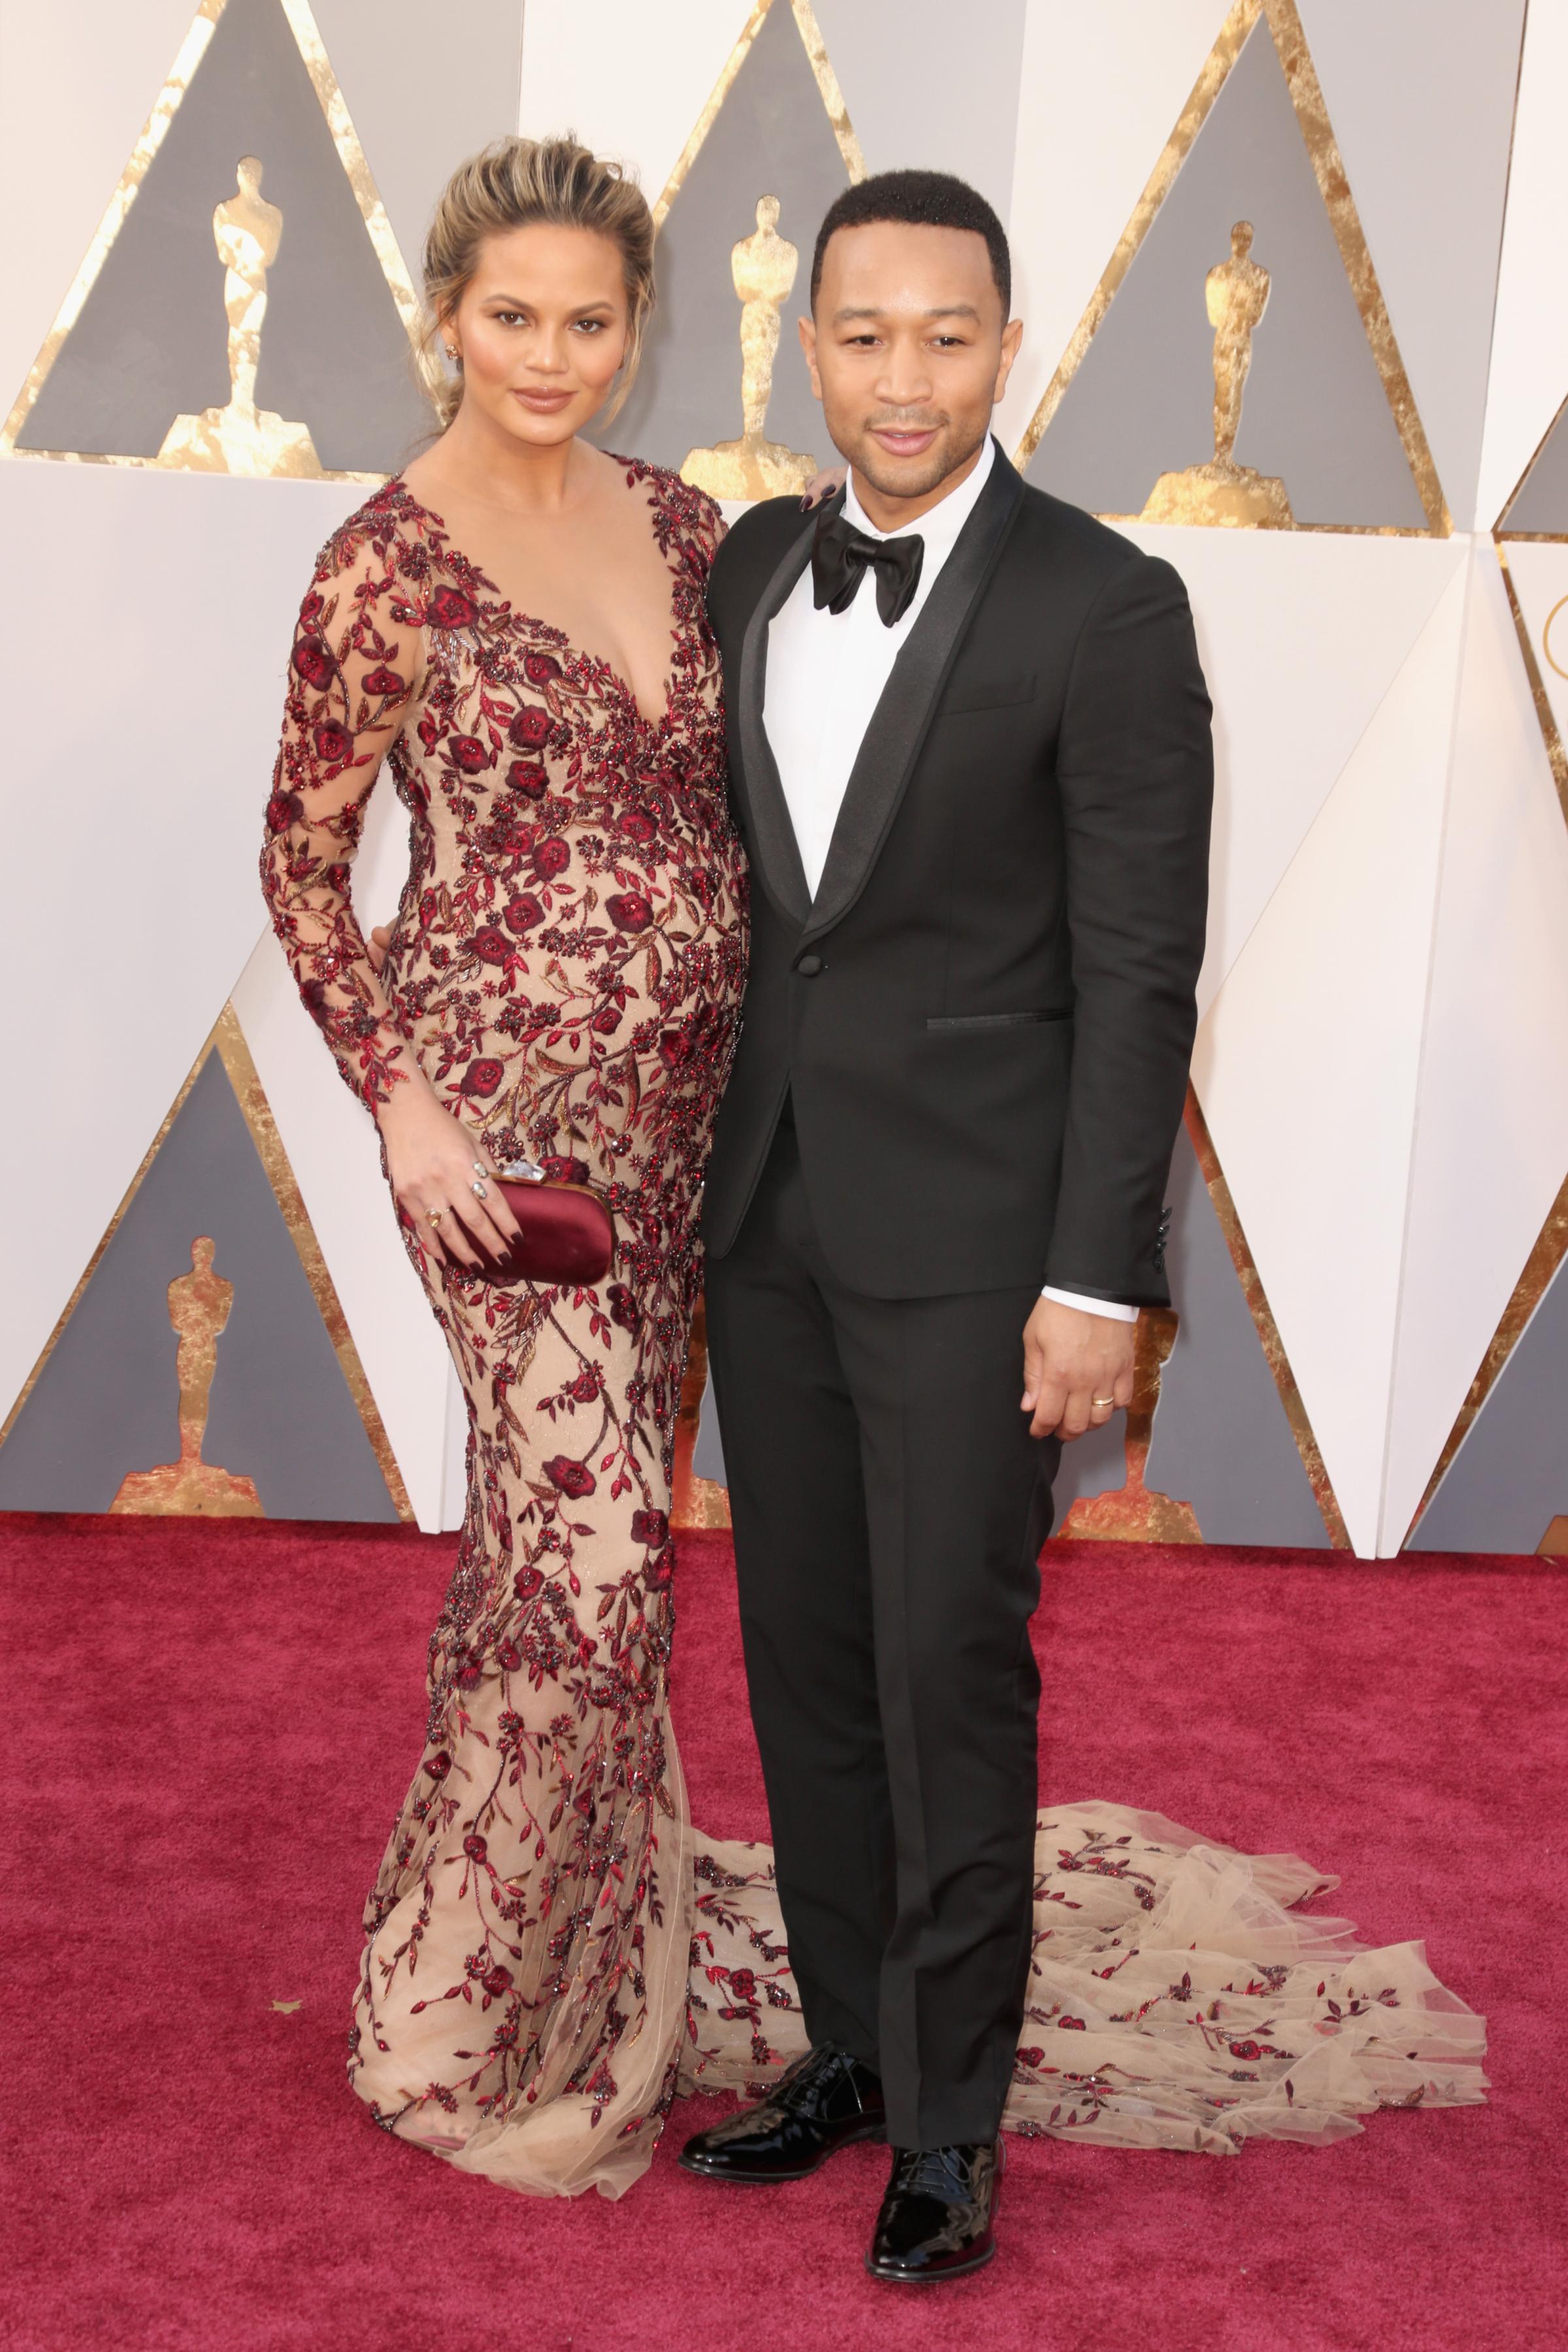 Chrissy Teigen and John Legend attend the 88th Annual Academy Awards on Feb. 28, 2016 in Hollywood, Calif.